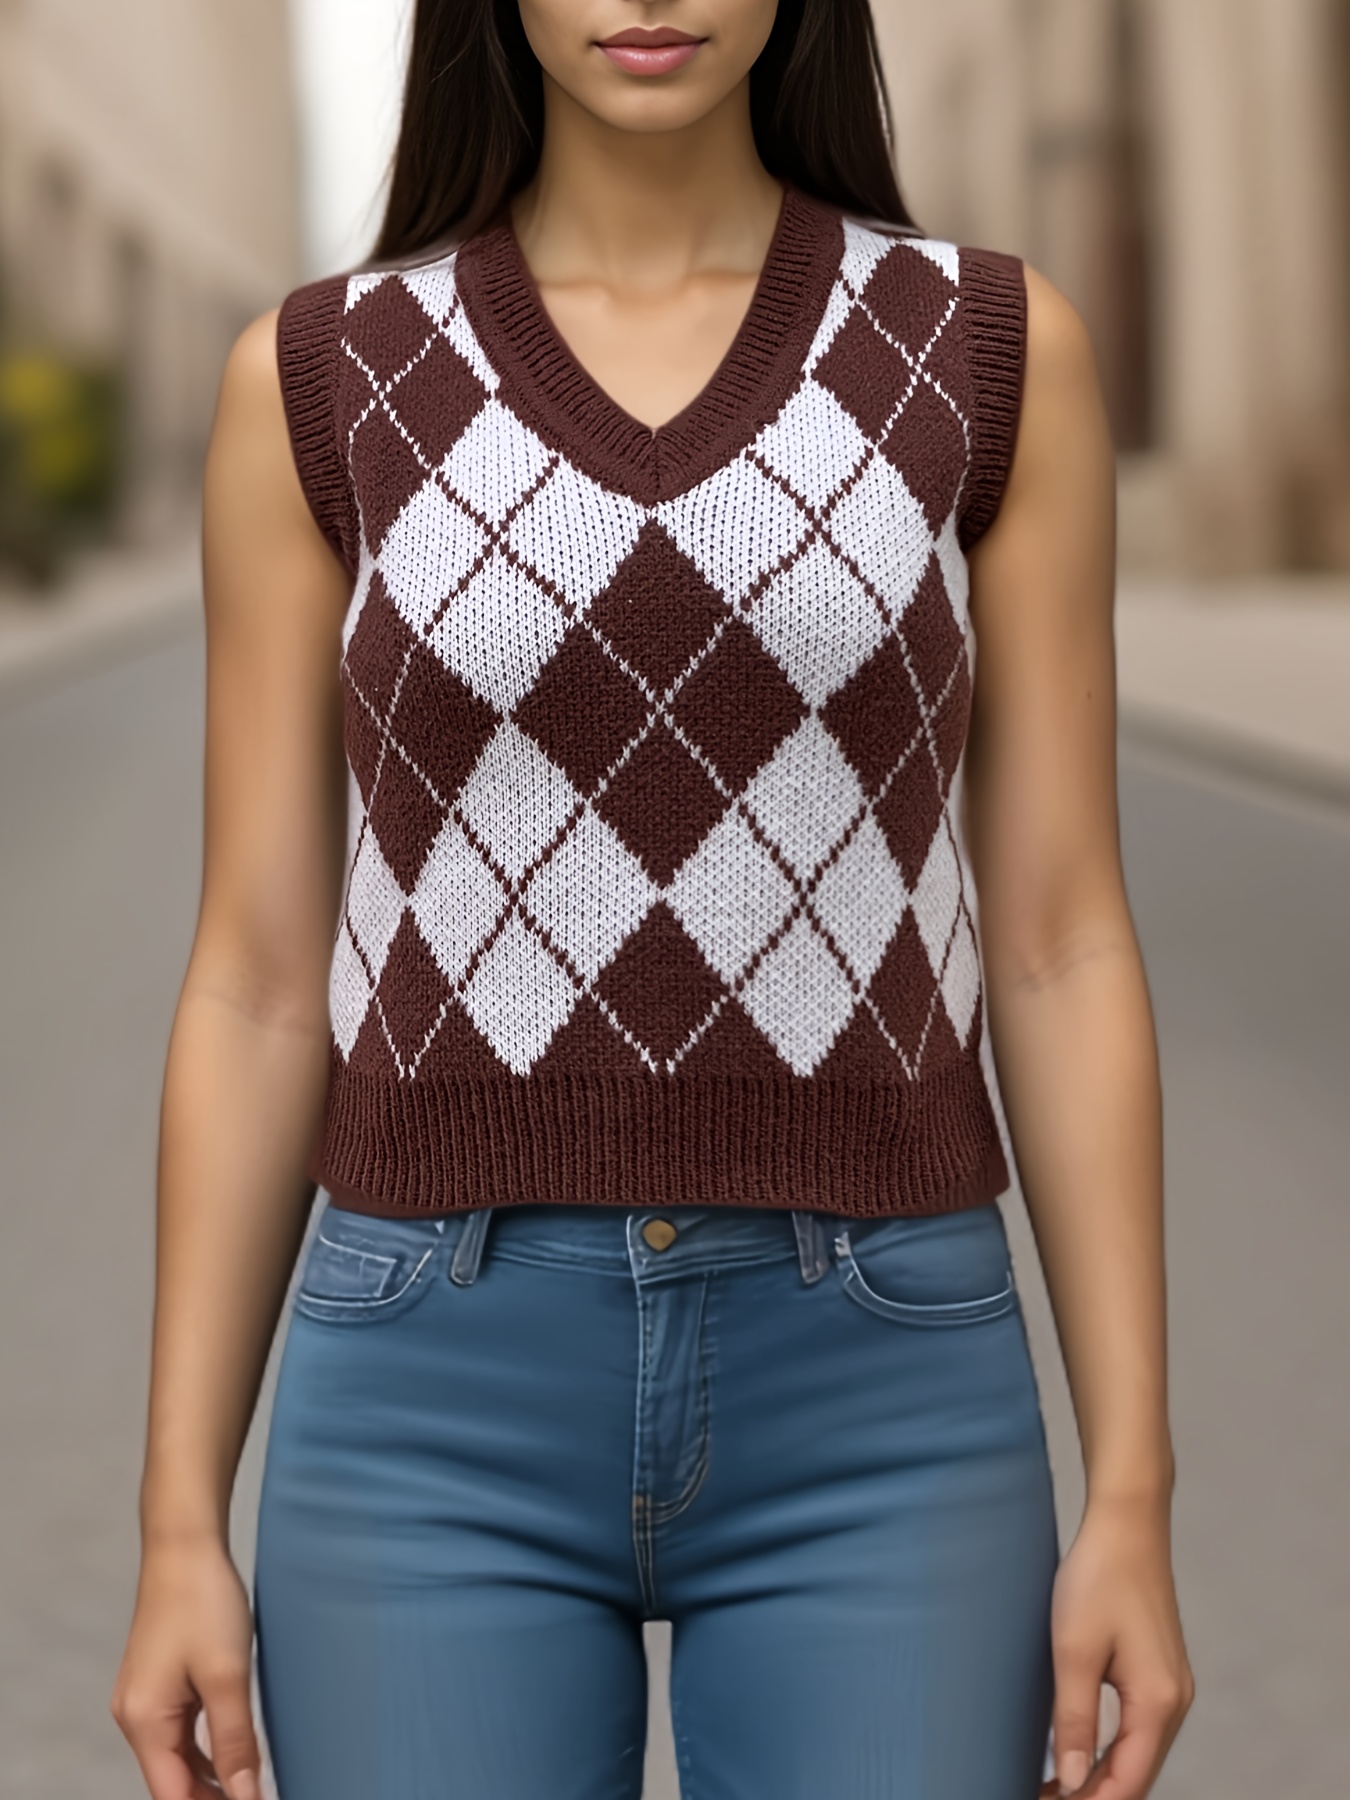 Argyle Pattern Crop Sweater Vest, Sleeveless V Neck Casual Sweater For  Spring & Fall, Women's Clothing